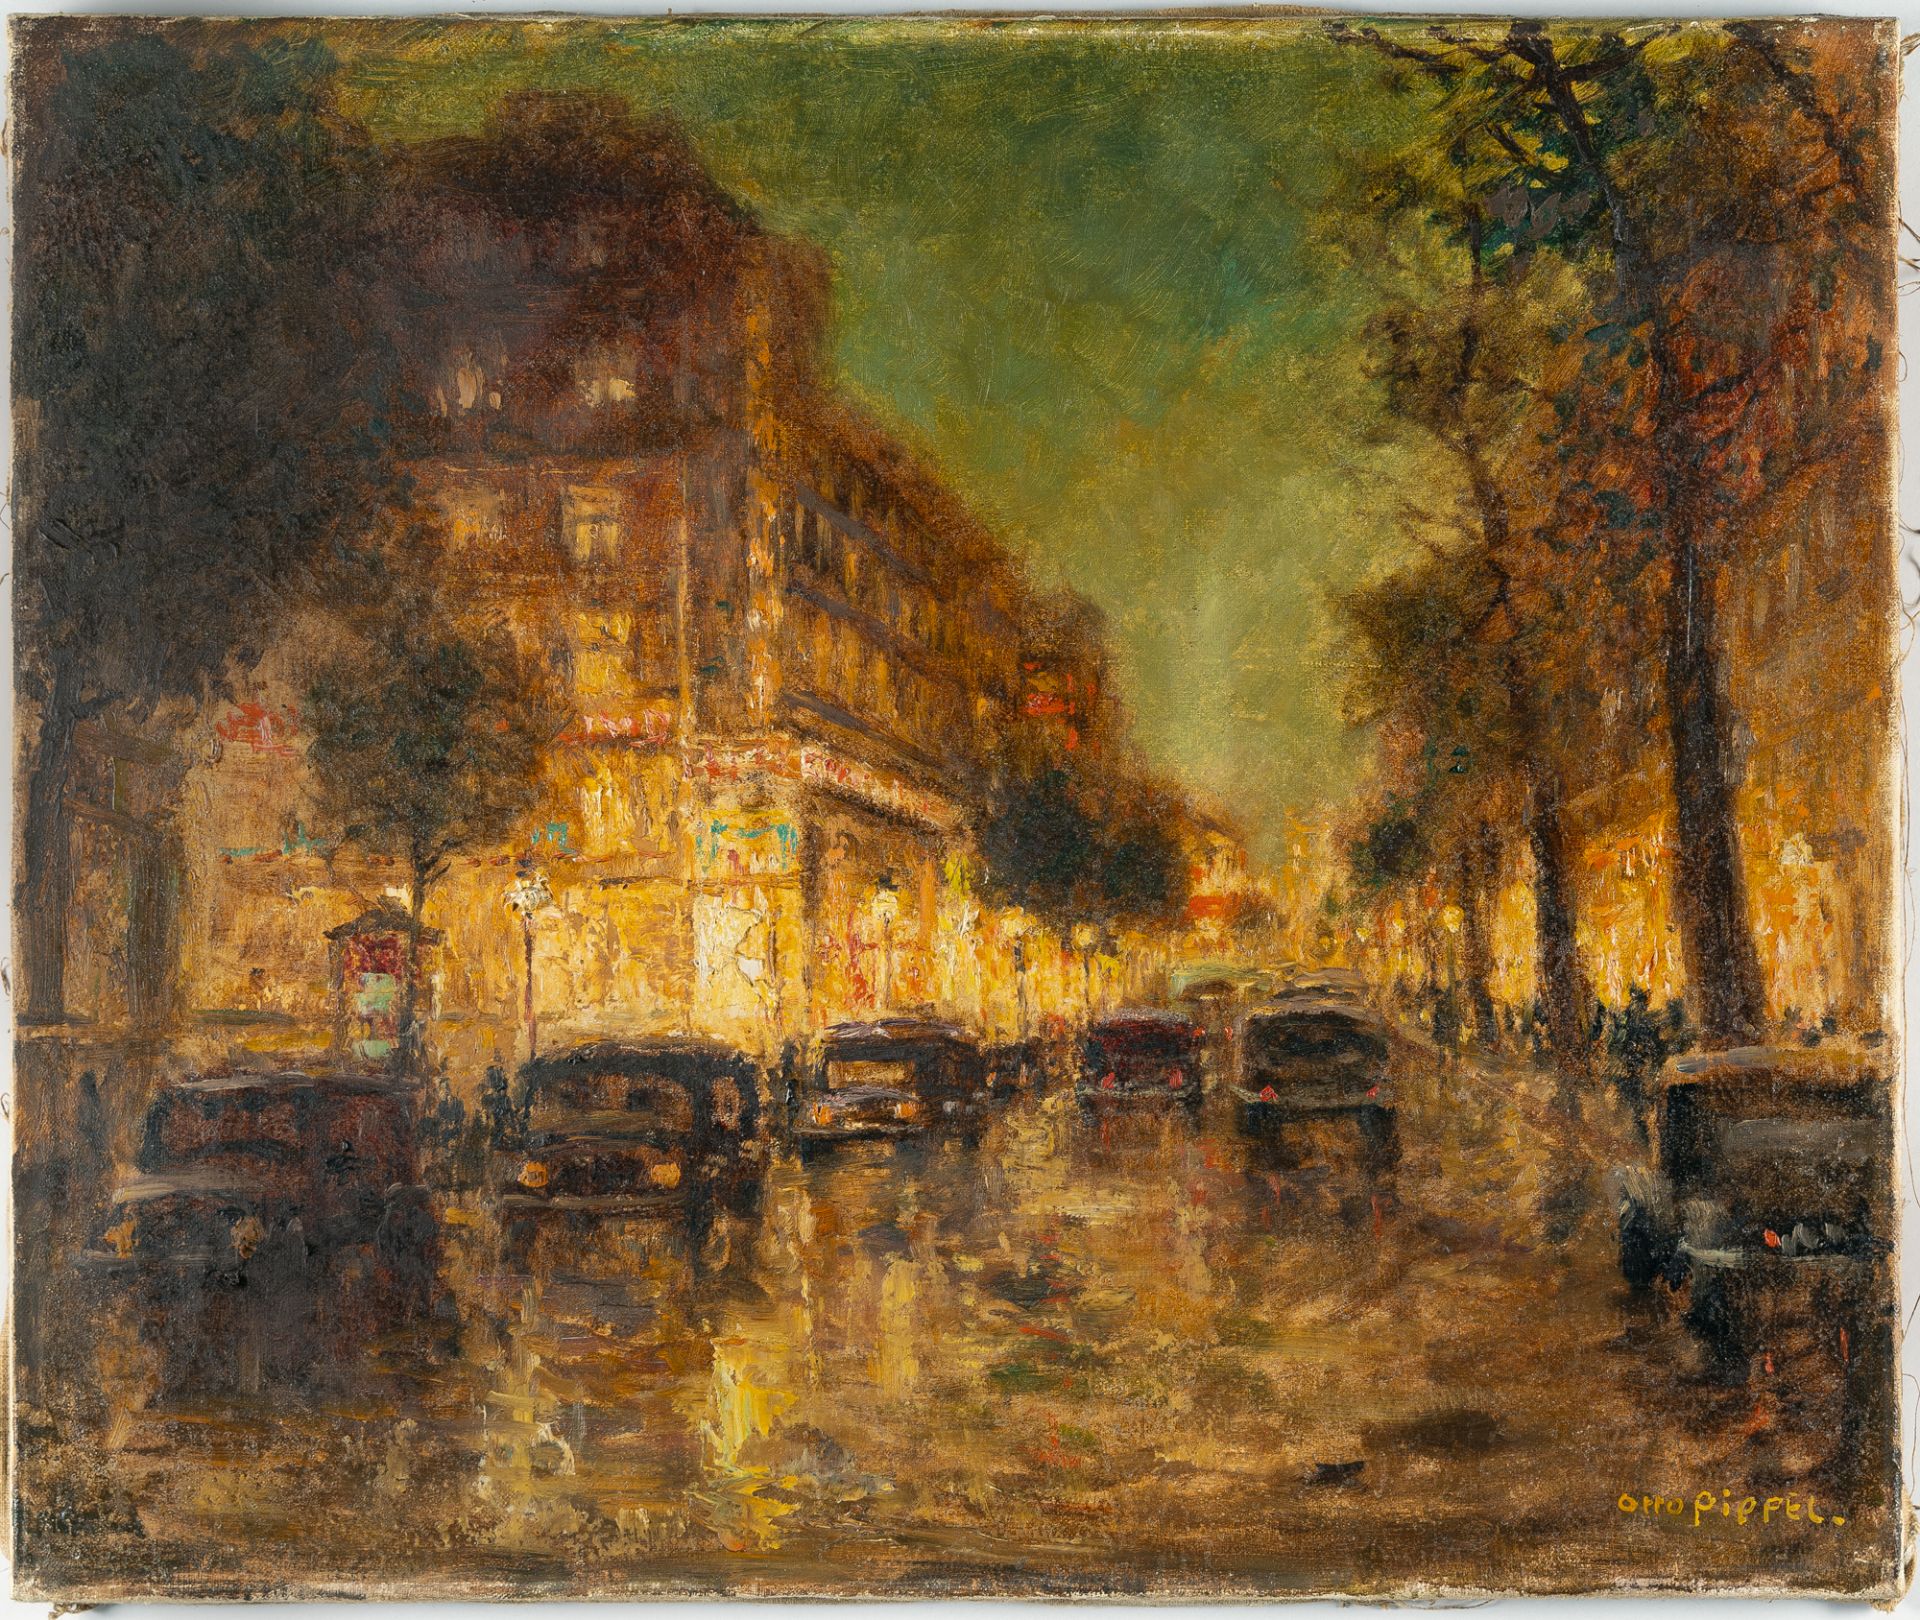 Otto Eduard Pippel, Street scene by night (Berlin by night).Oil on canvas. (Ca. 1920s). Ca. 50.5 x - Image 4 of 4